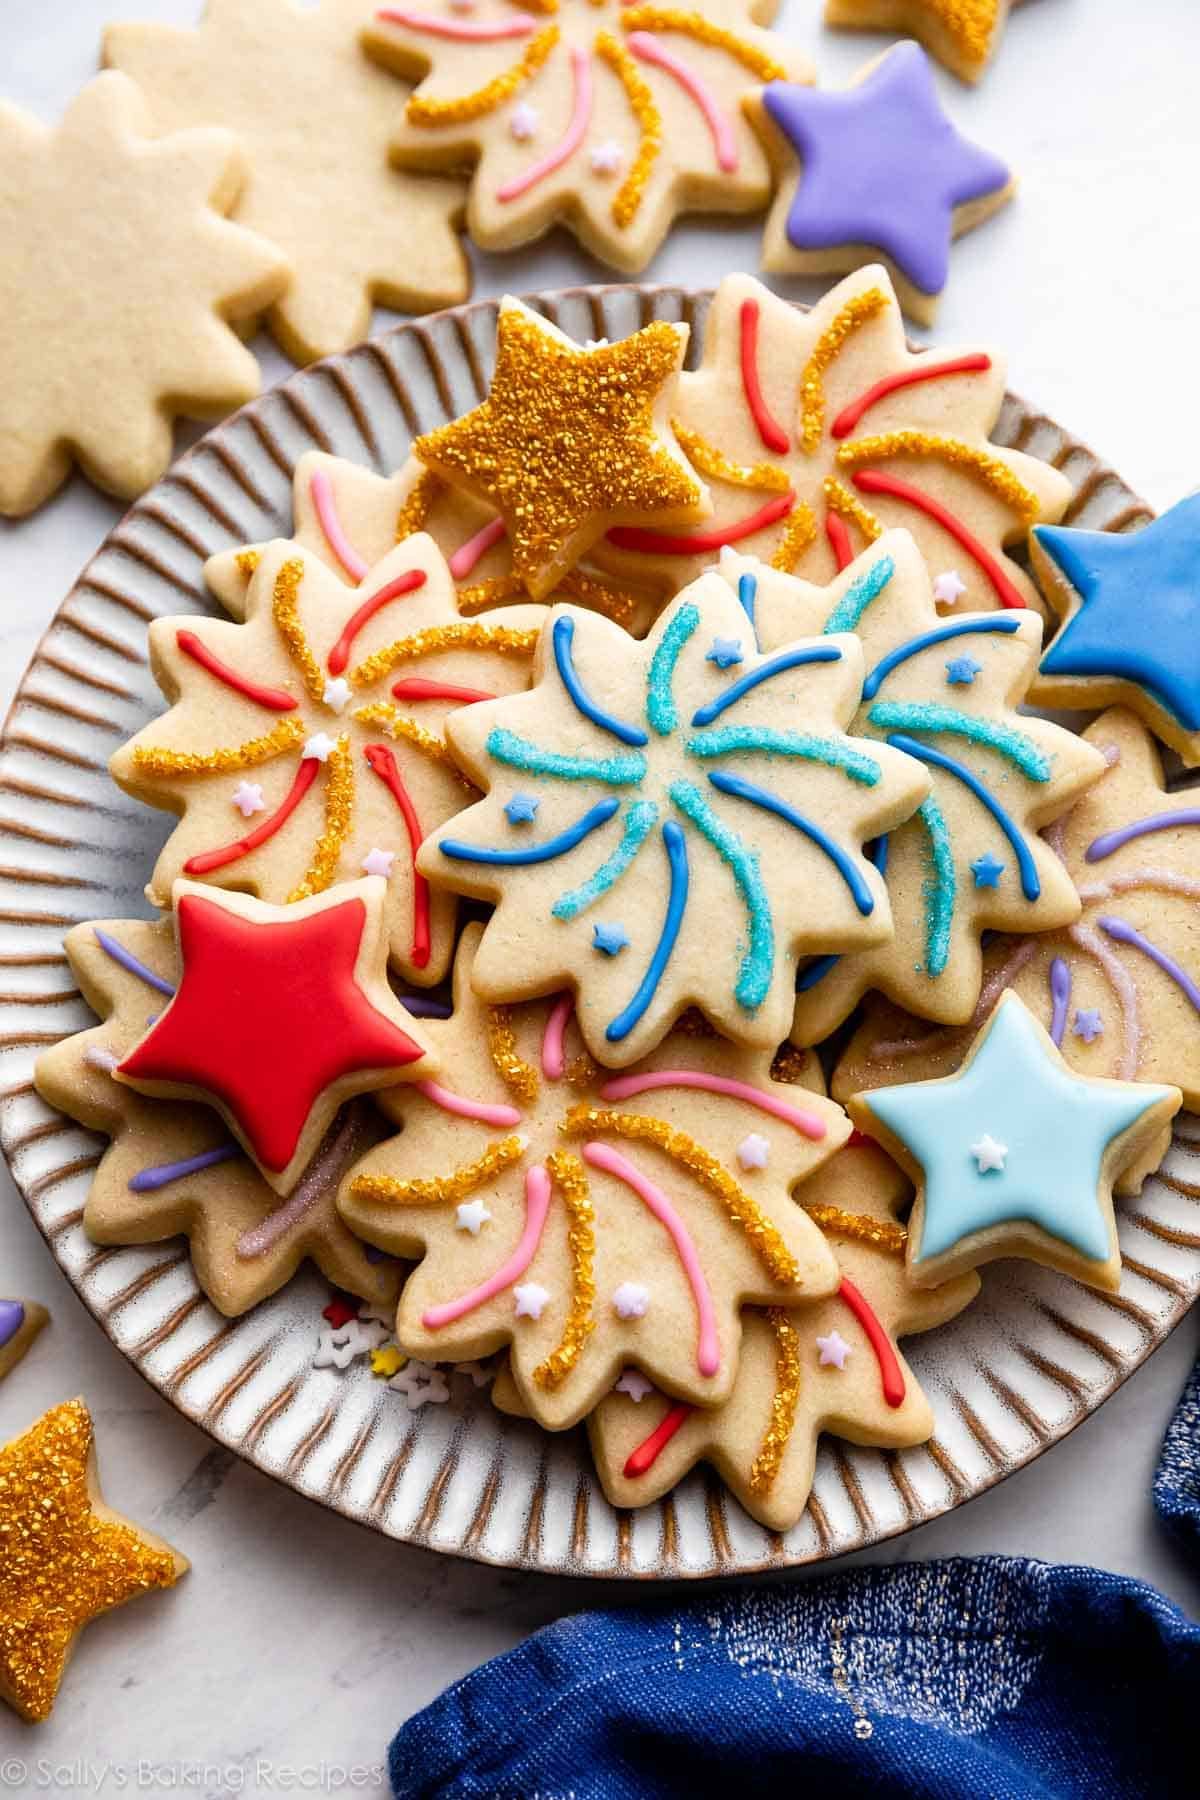 sugar cookies decorated like fireworks and stars with blue, red, pink, and purple icing on top arranged on gray plate.